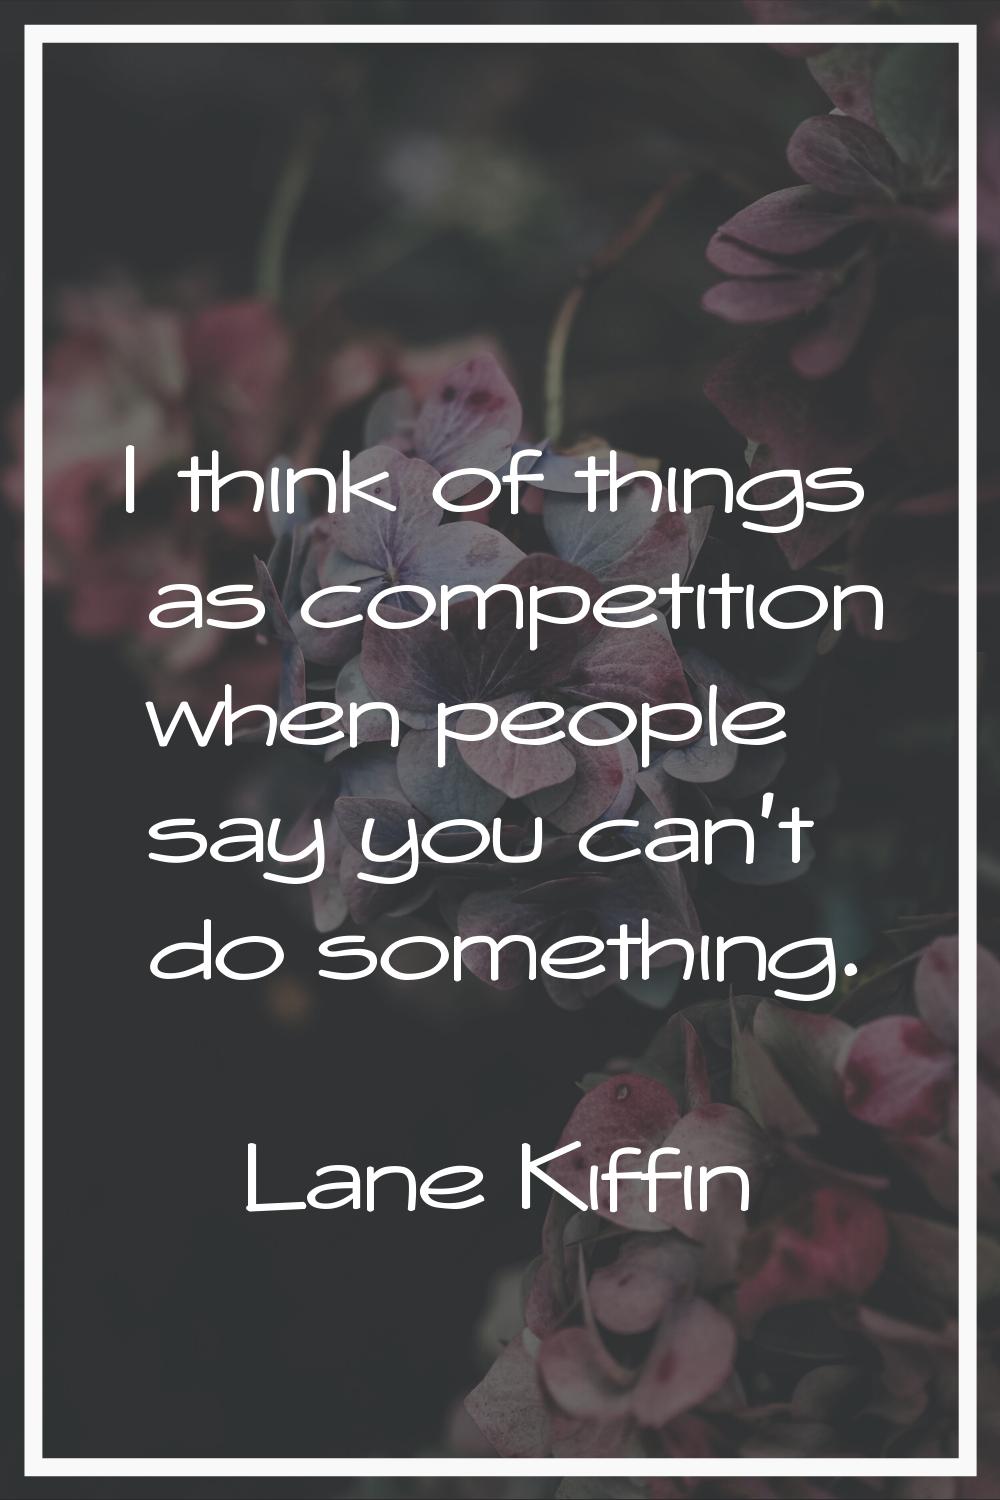 I think of things as competition when people say you can't do something.